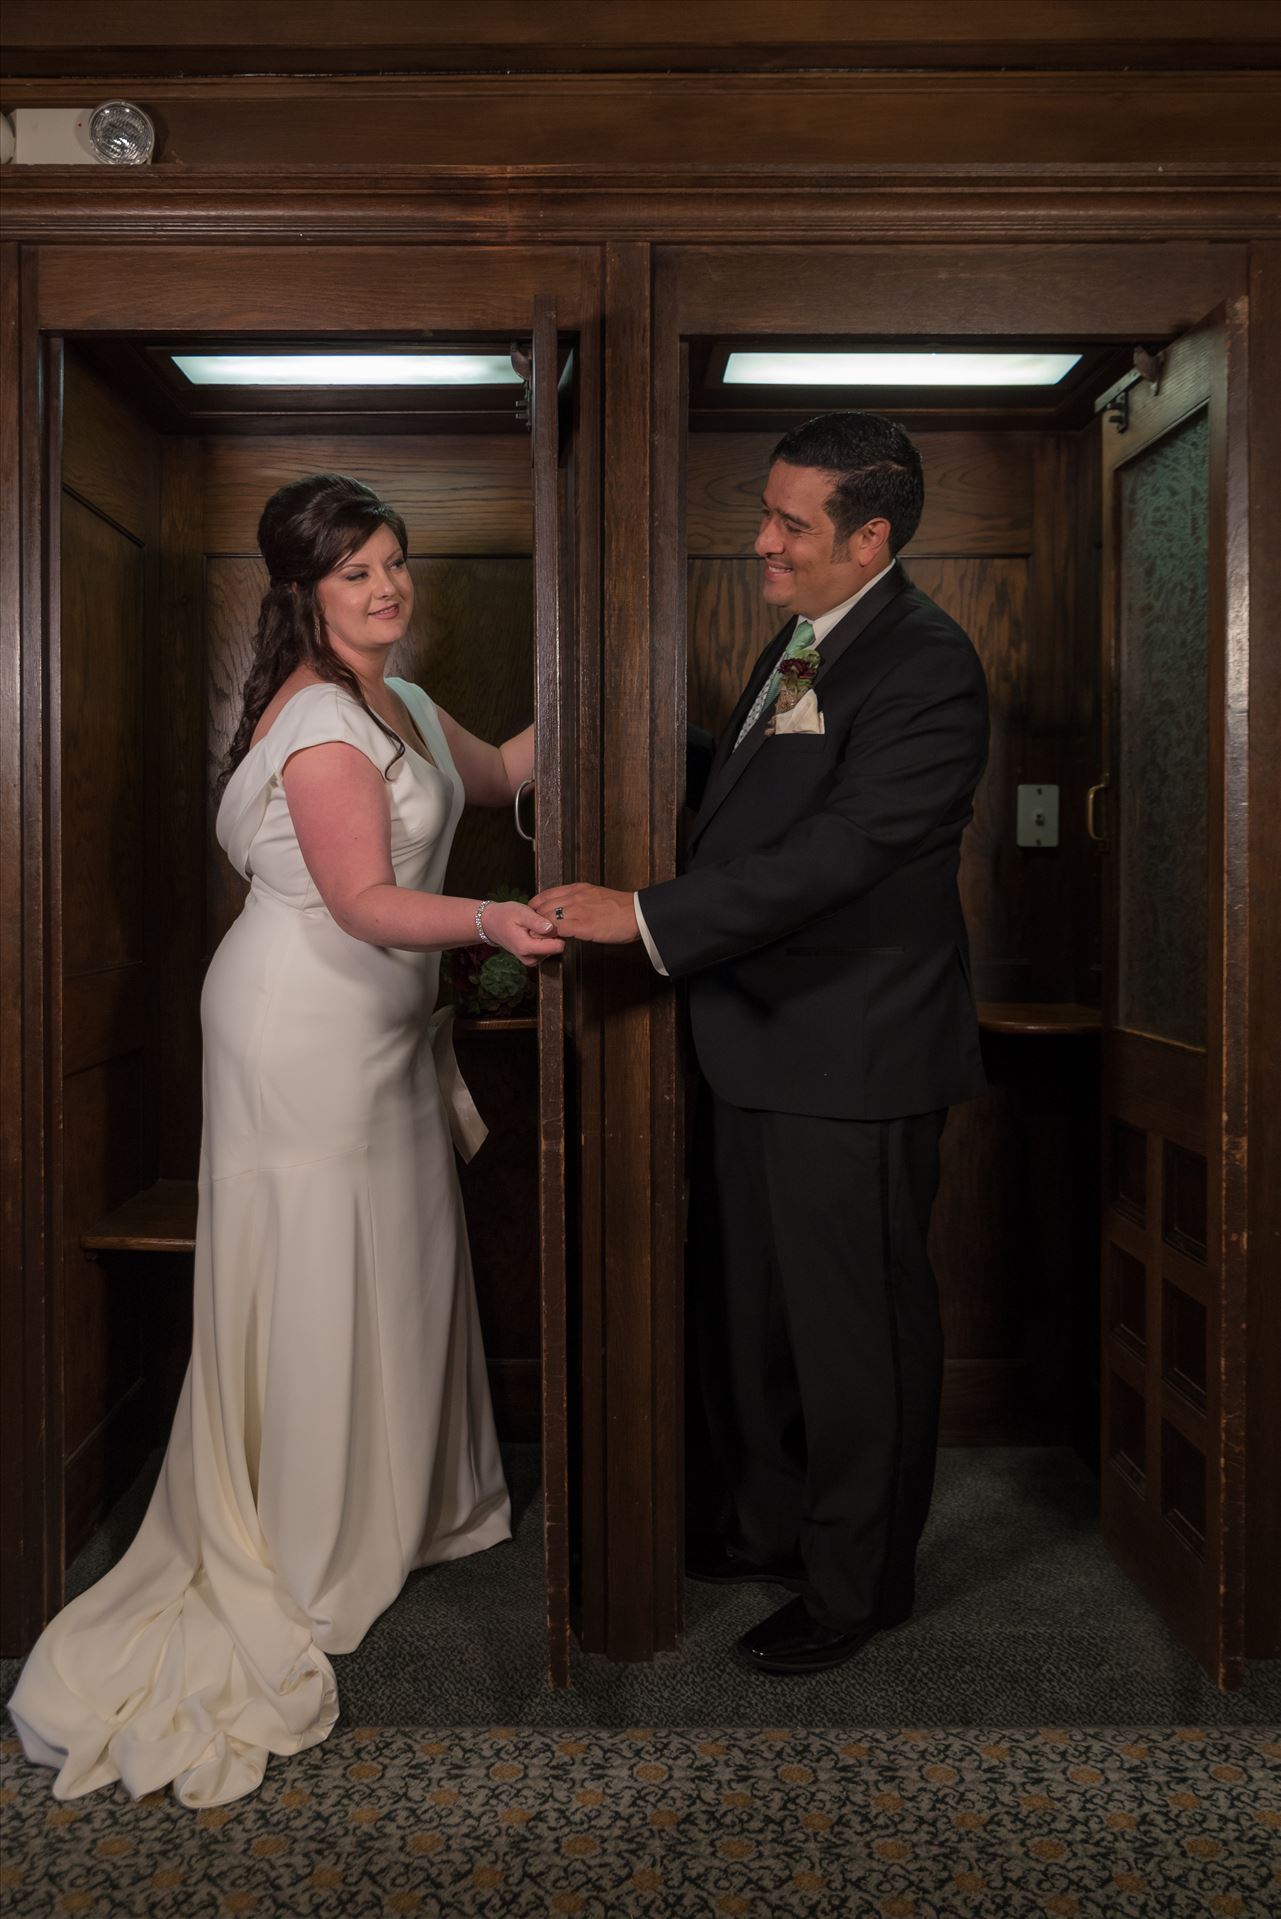 Mary and Alejandro 30 - Wedding photography at the Historic Santa Maria Inn in Santa Maria, California by Mirror's Edge Photography. Bride and Groom in vintage phone booths inside of the Santa Maria Inn. by Sarah Williams